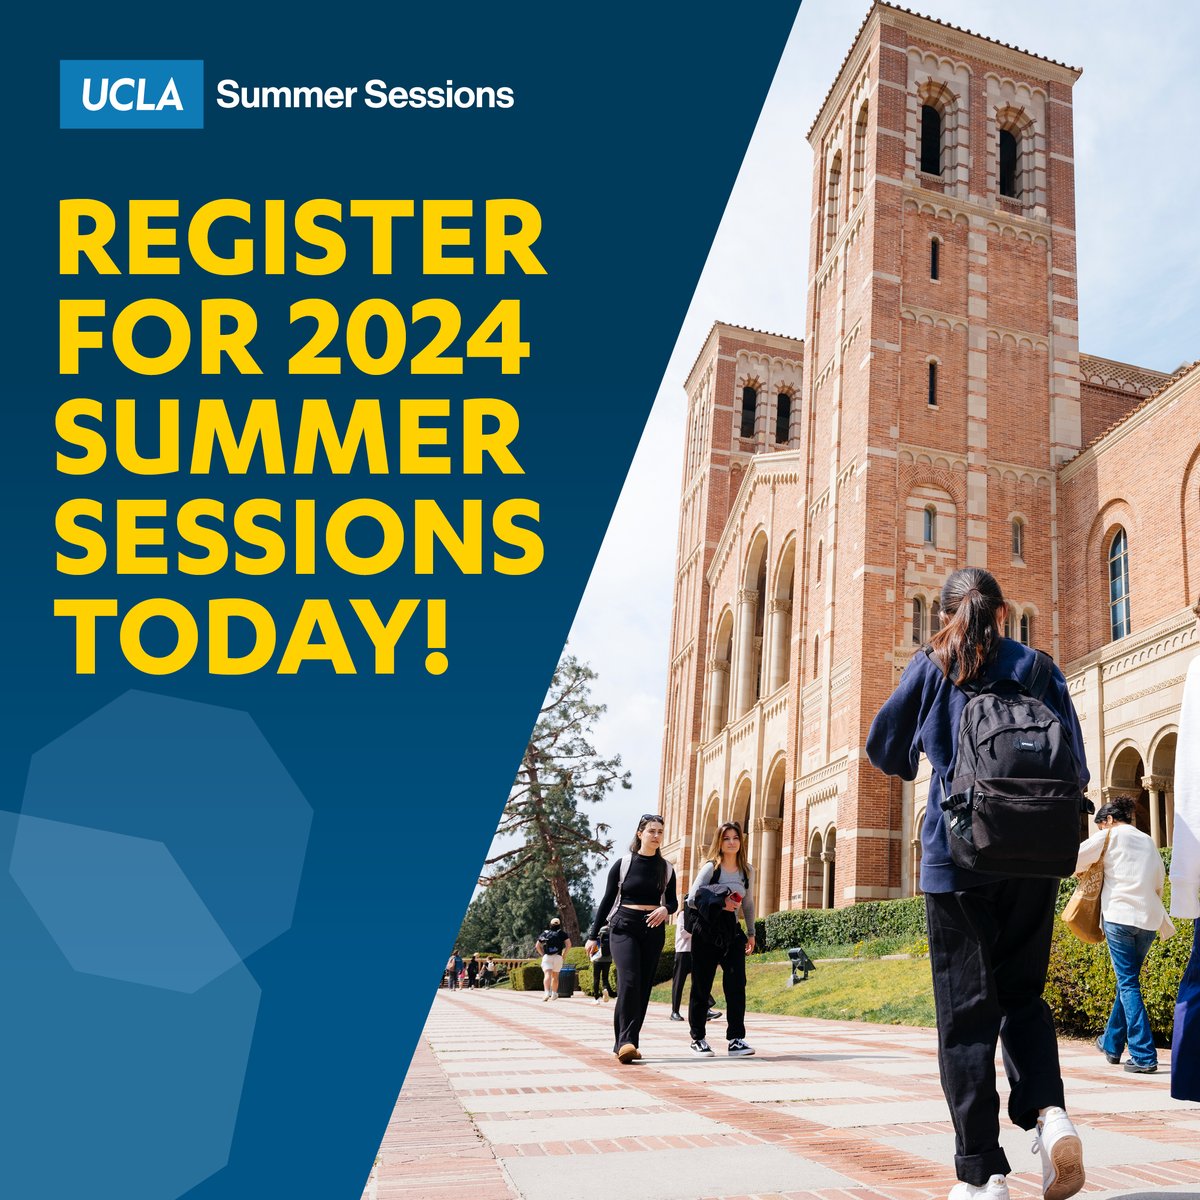 Don’t miss out on the opportunity to level up your summer! With in-person, hybrid and online course delivery formats available, chart your academic or professional path forward with UCLA Summer Sessions. Register today at summer.ucla.edu.